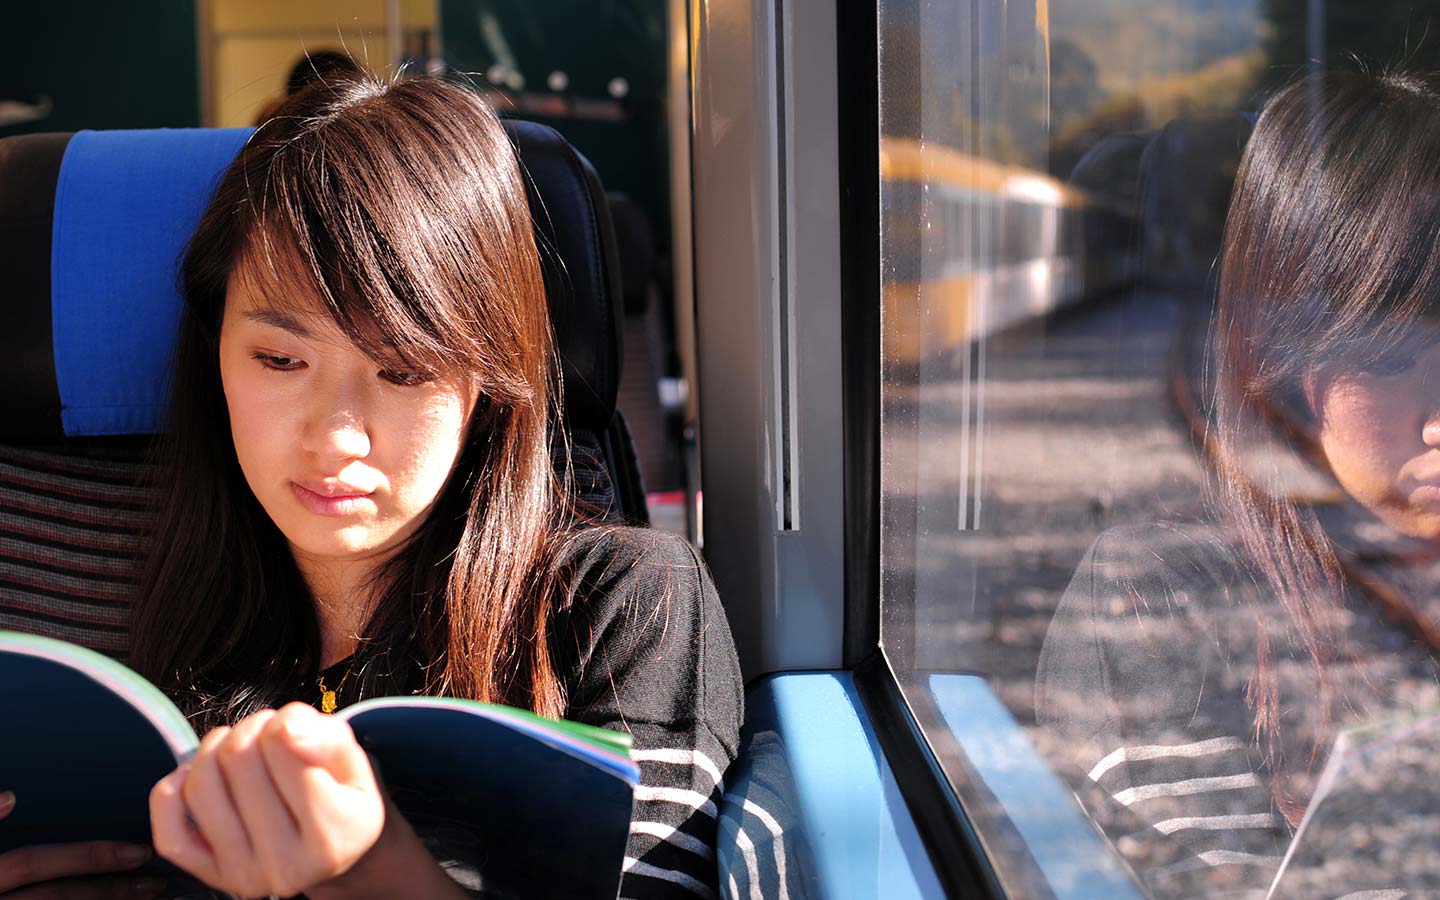 A student reading a book on a train